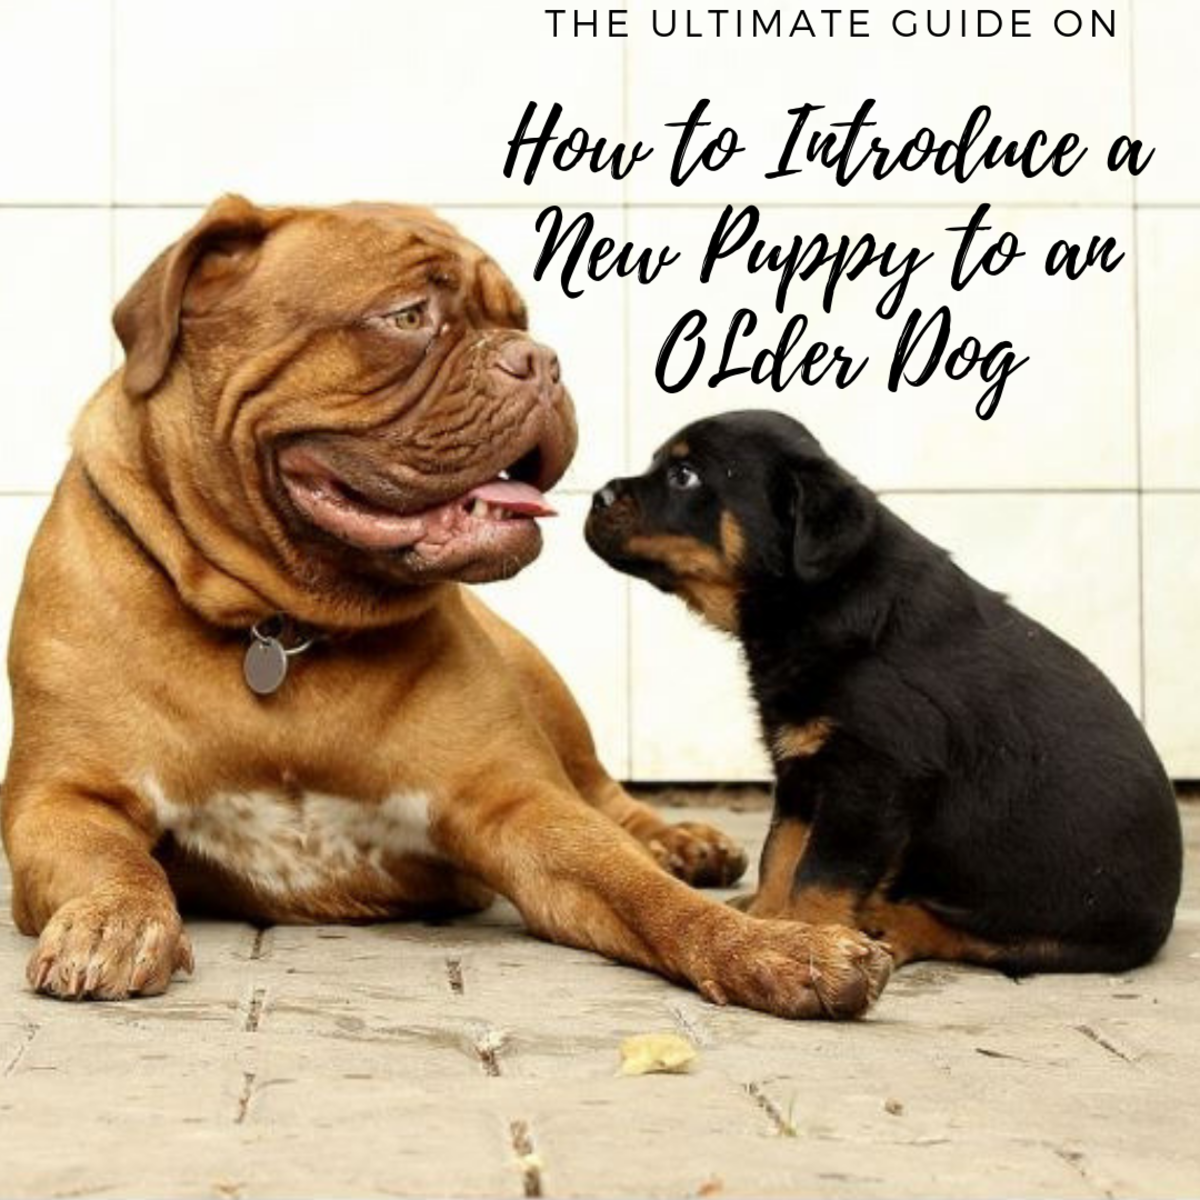 how-to-introduce-a-new-puppy-to-an-older-dog